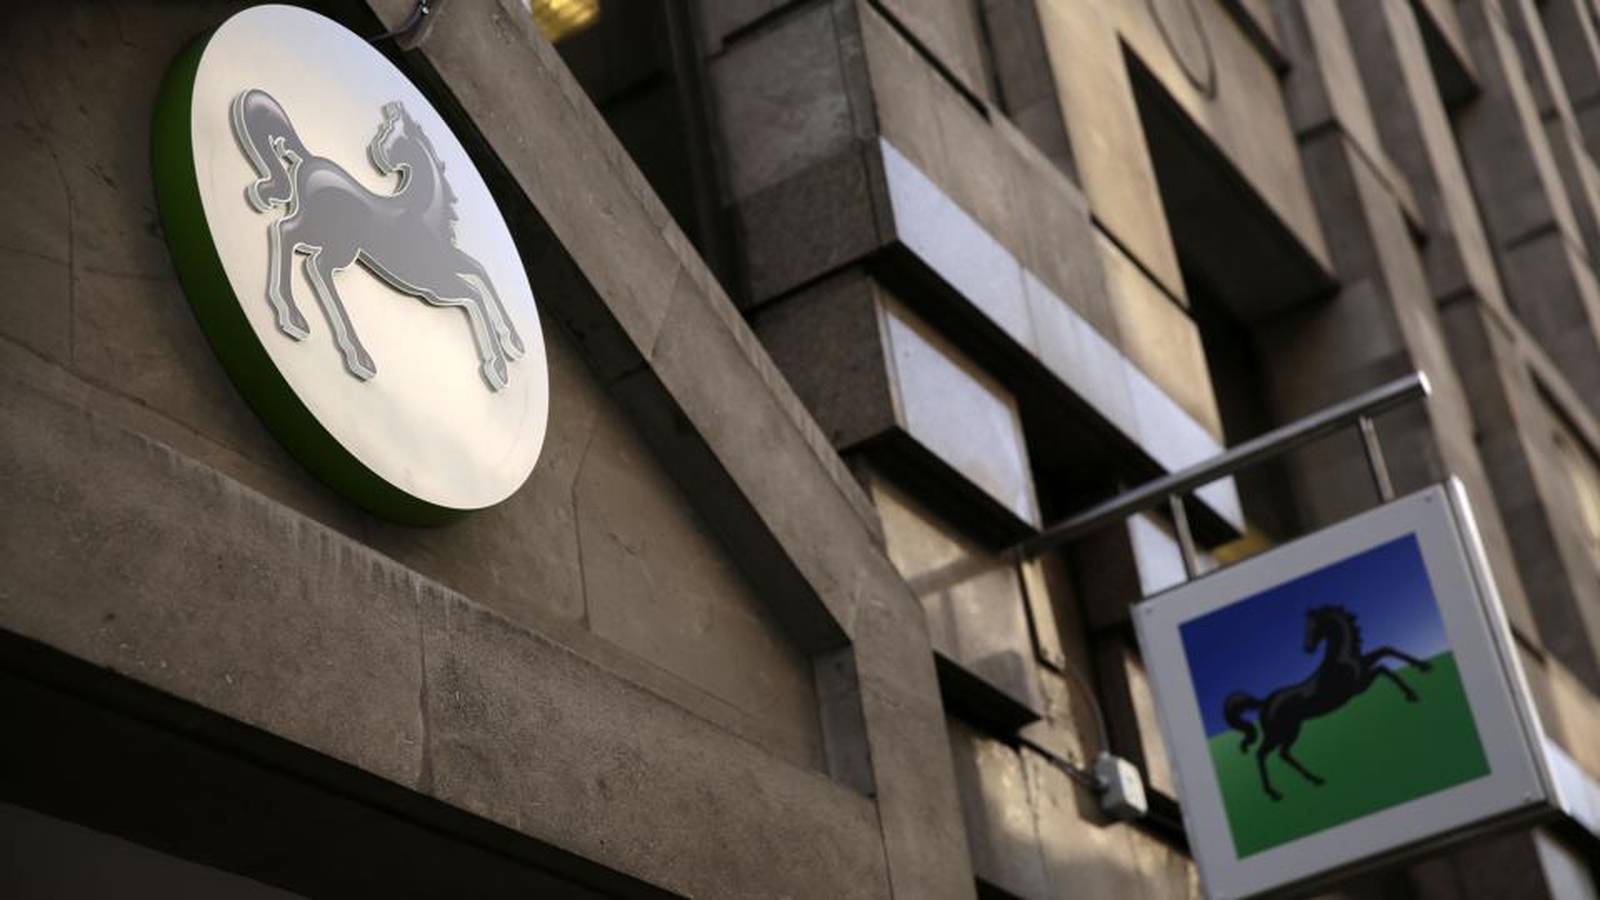 TSB name revived as Lloyds rebrands branches – The Irish Times